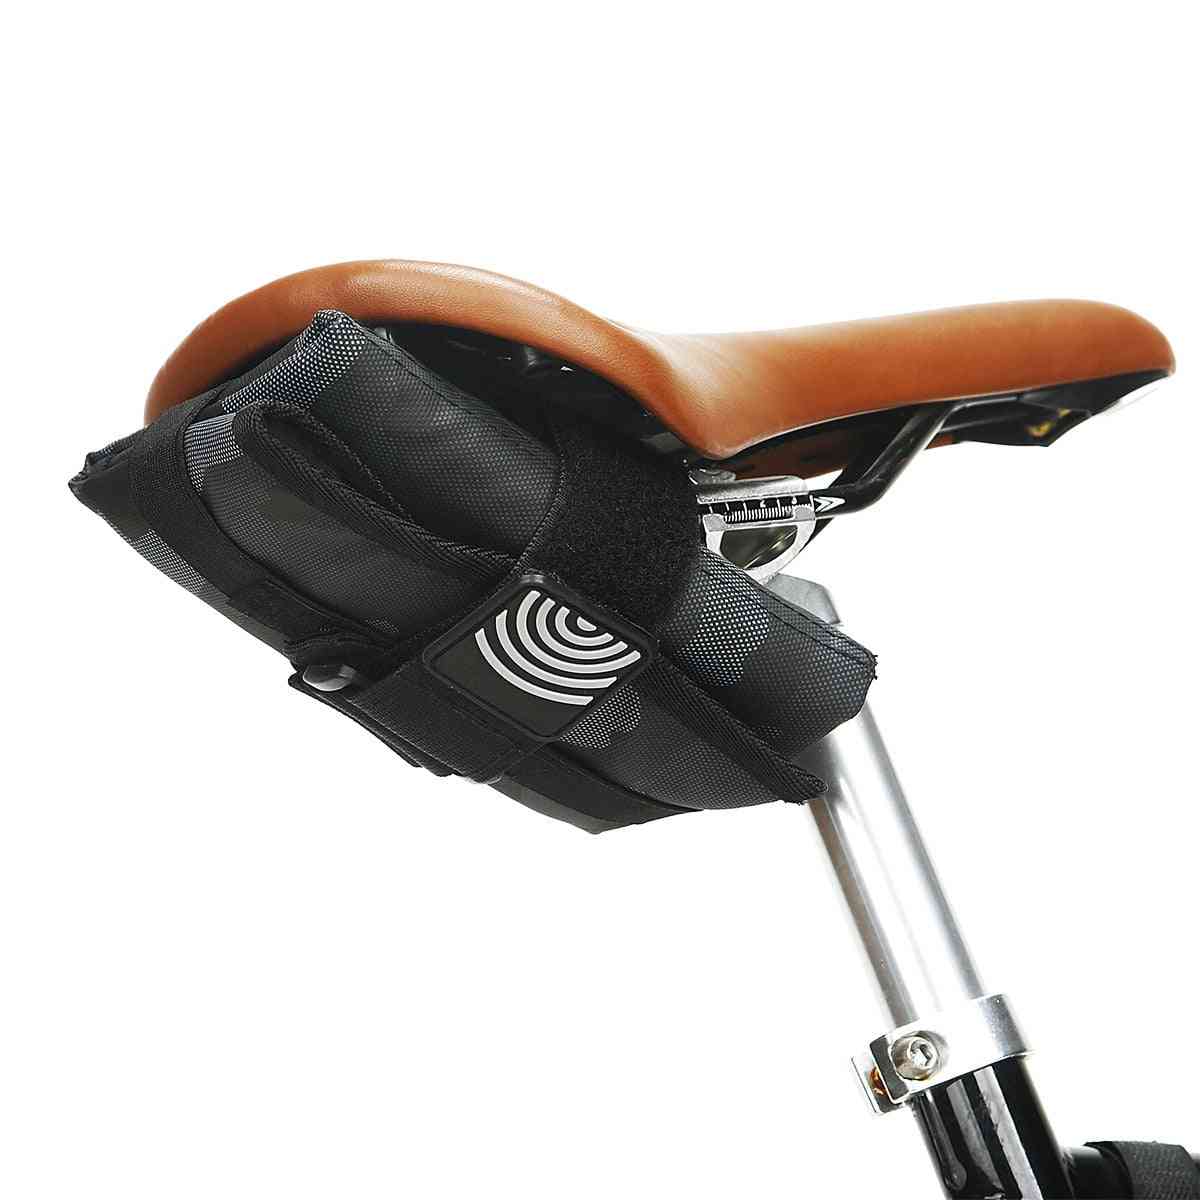 Bicycle Bag Tail Tool Bag Rear Seat Case Bike Saddle Pouch Frame Front Bag